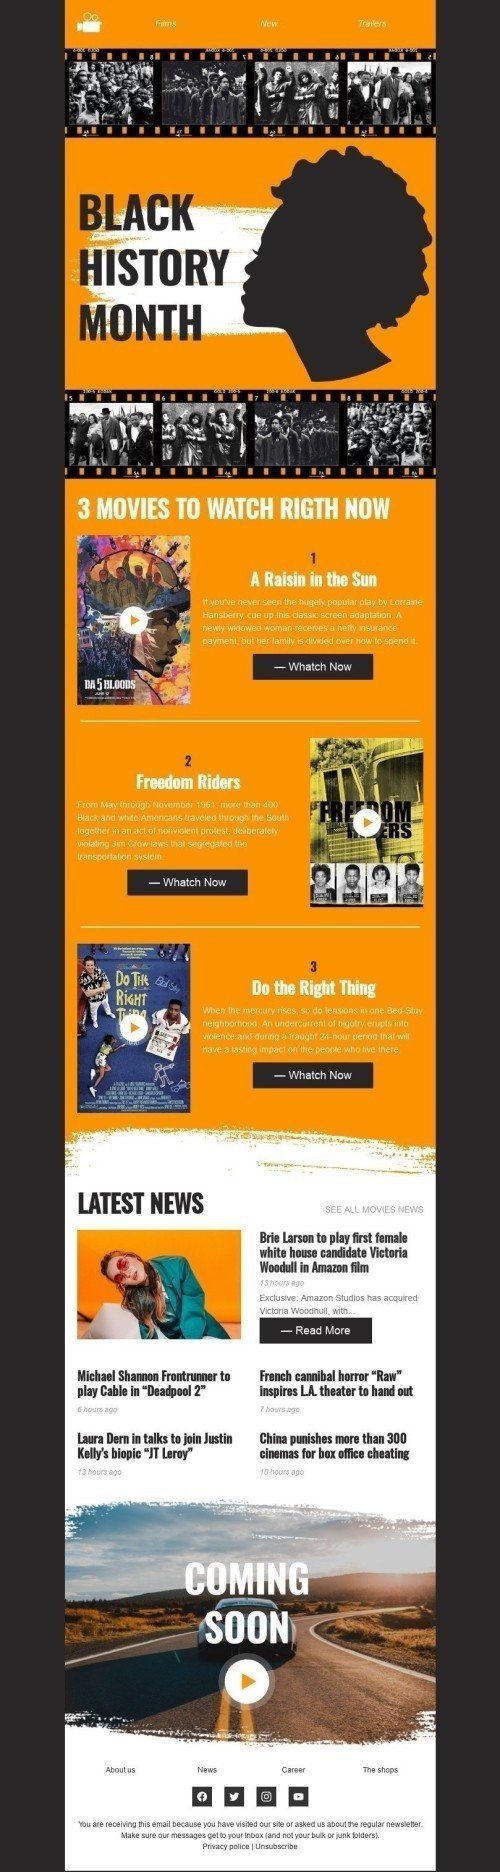 Black History Month Email Template "Watch right now" for Movies industry mobile view